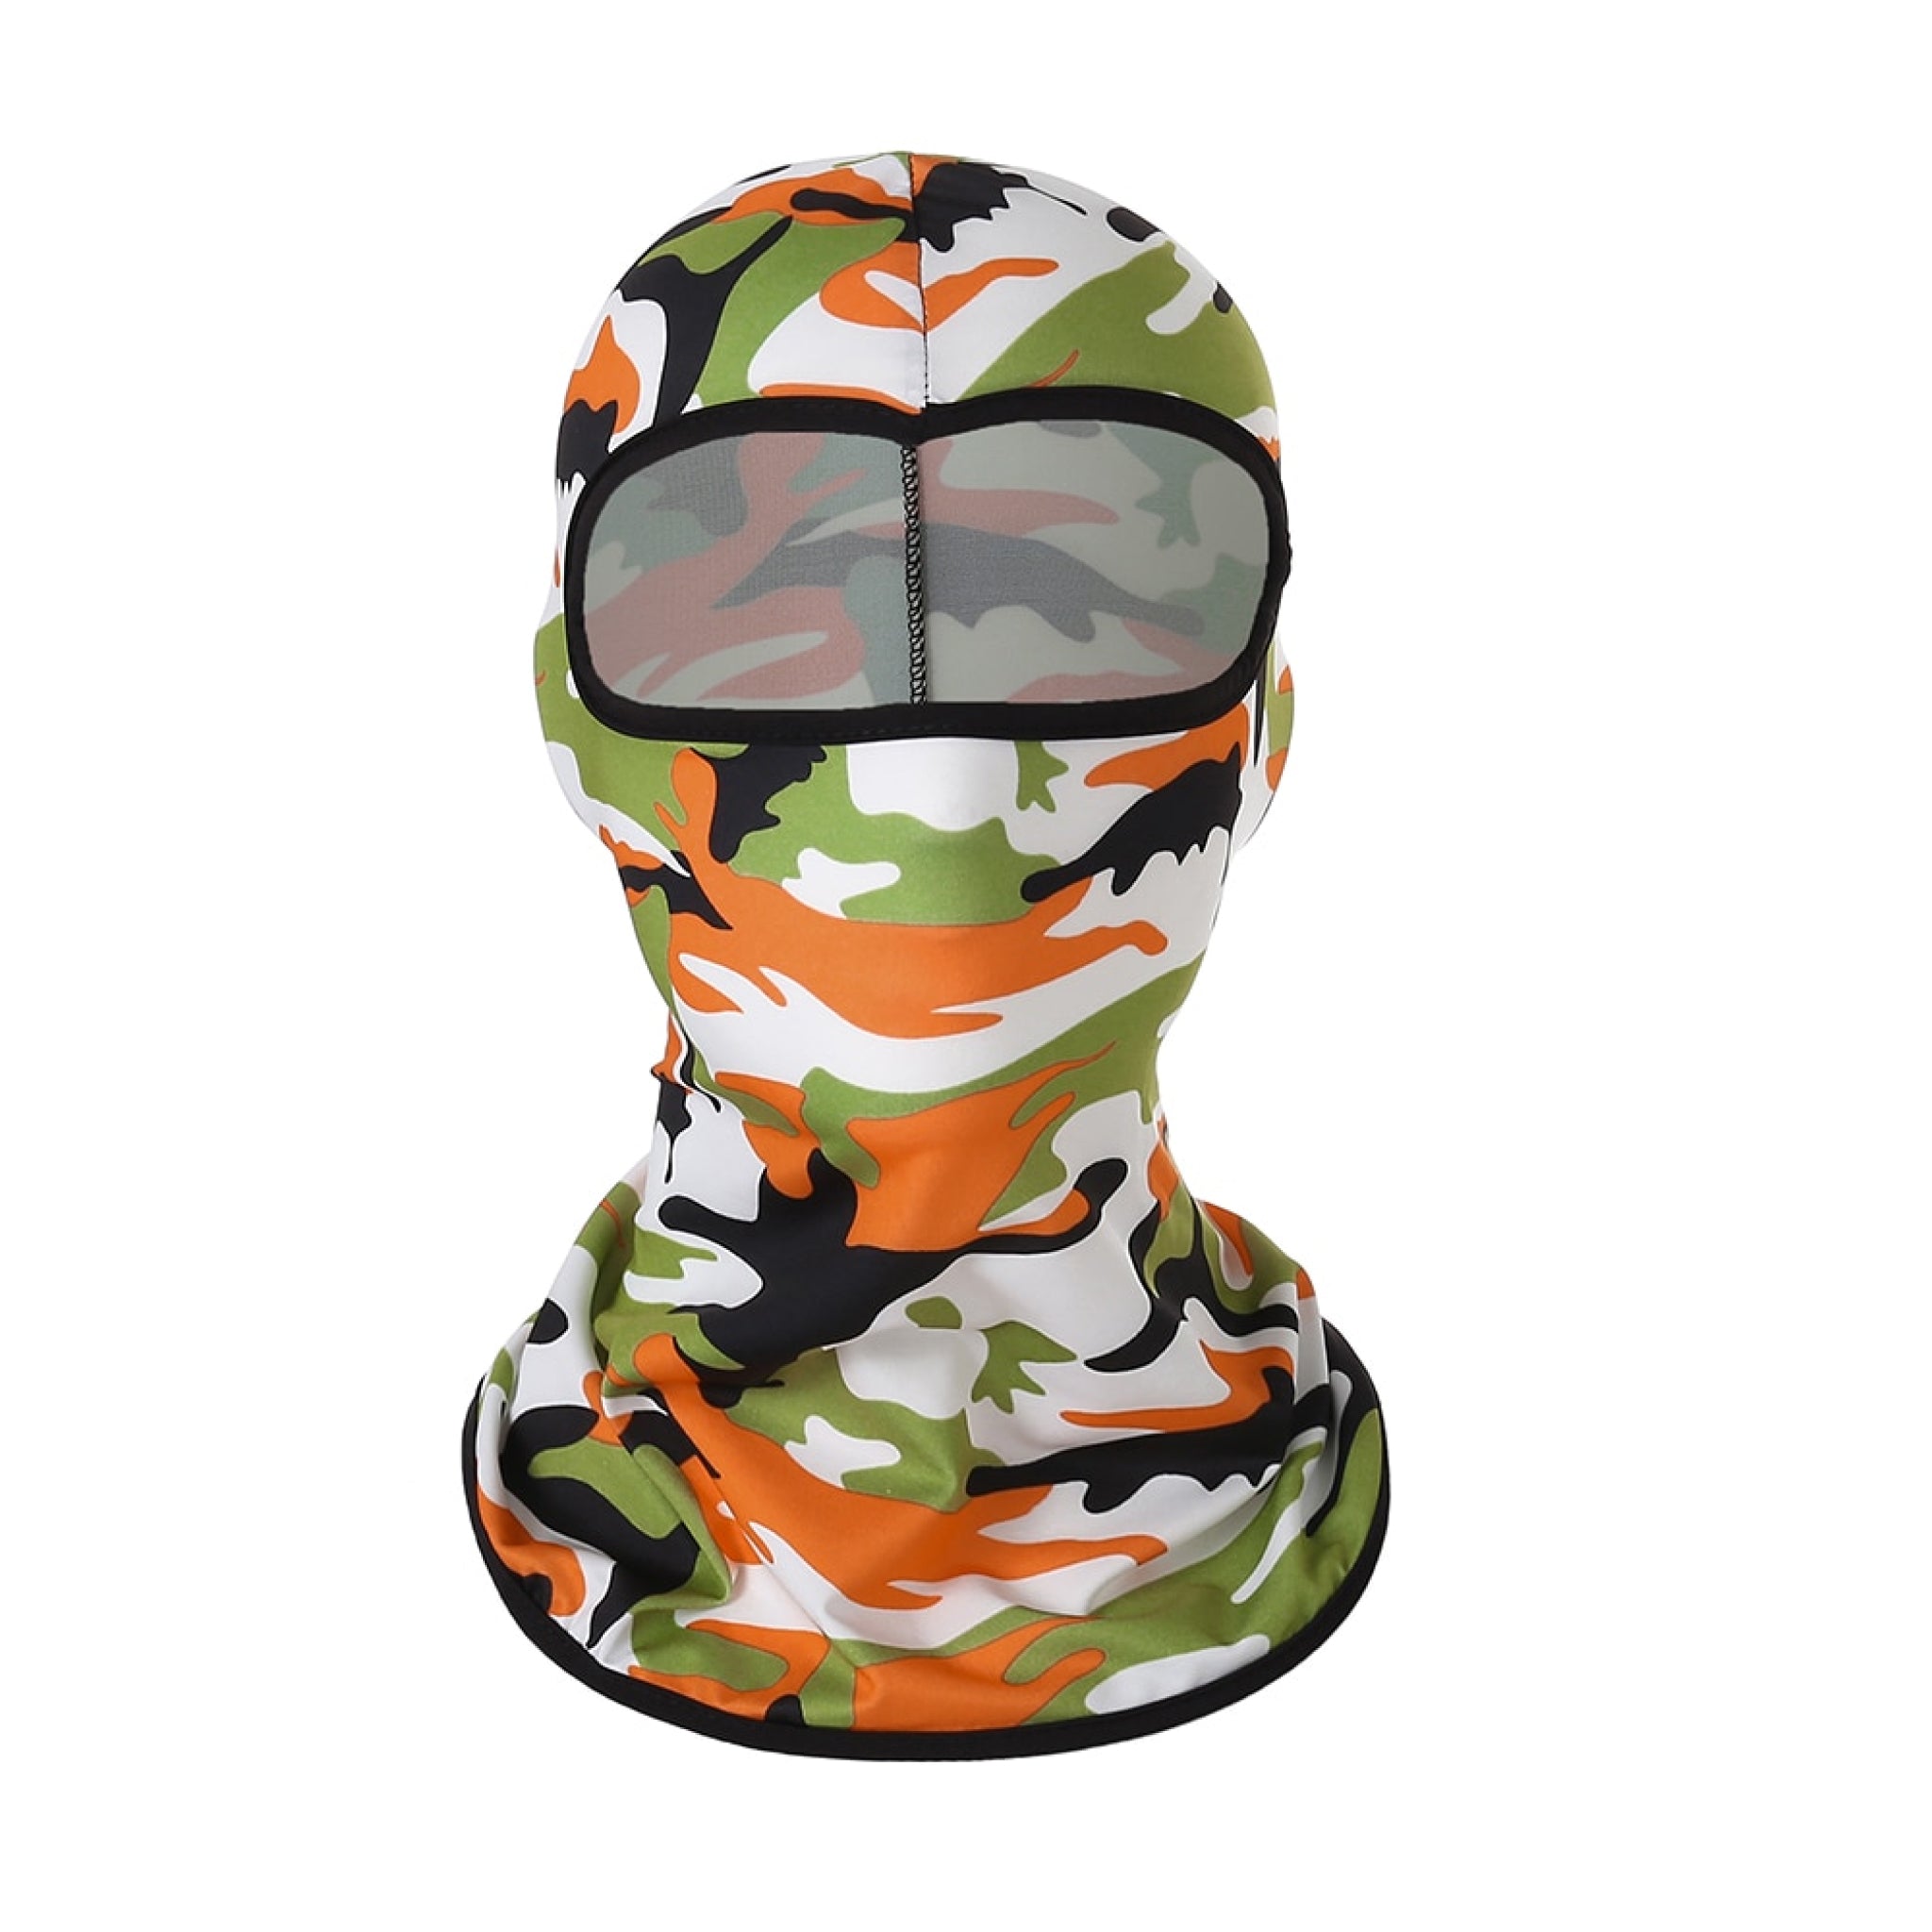 Cagoule camouflage